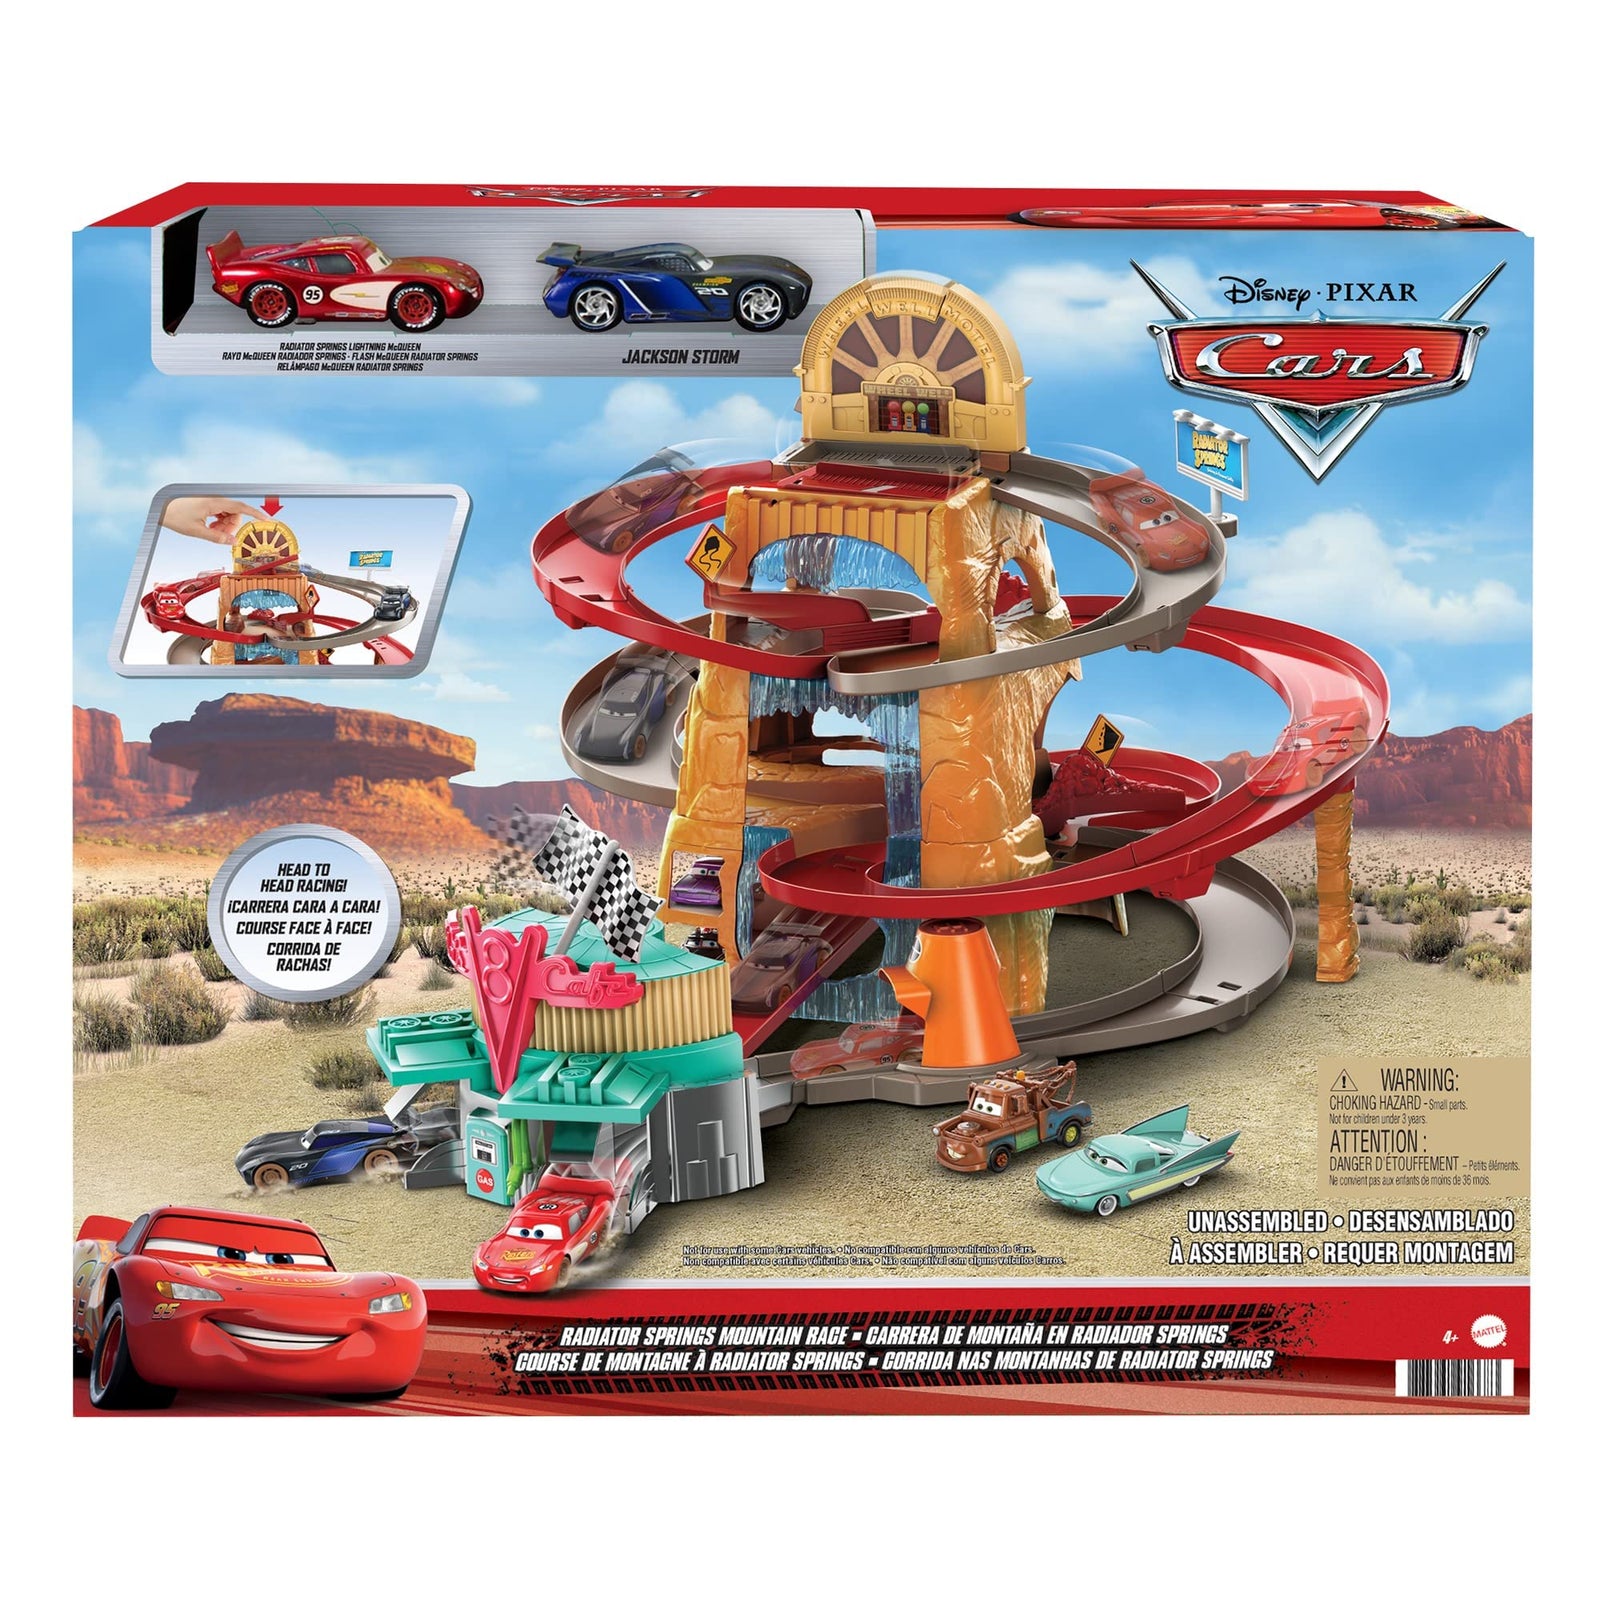 Radiator Springs Mountain Race Playset, Complete Racing Play with Two Vehicles, Gift for Cars Fans Ages 4 Years and Older